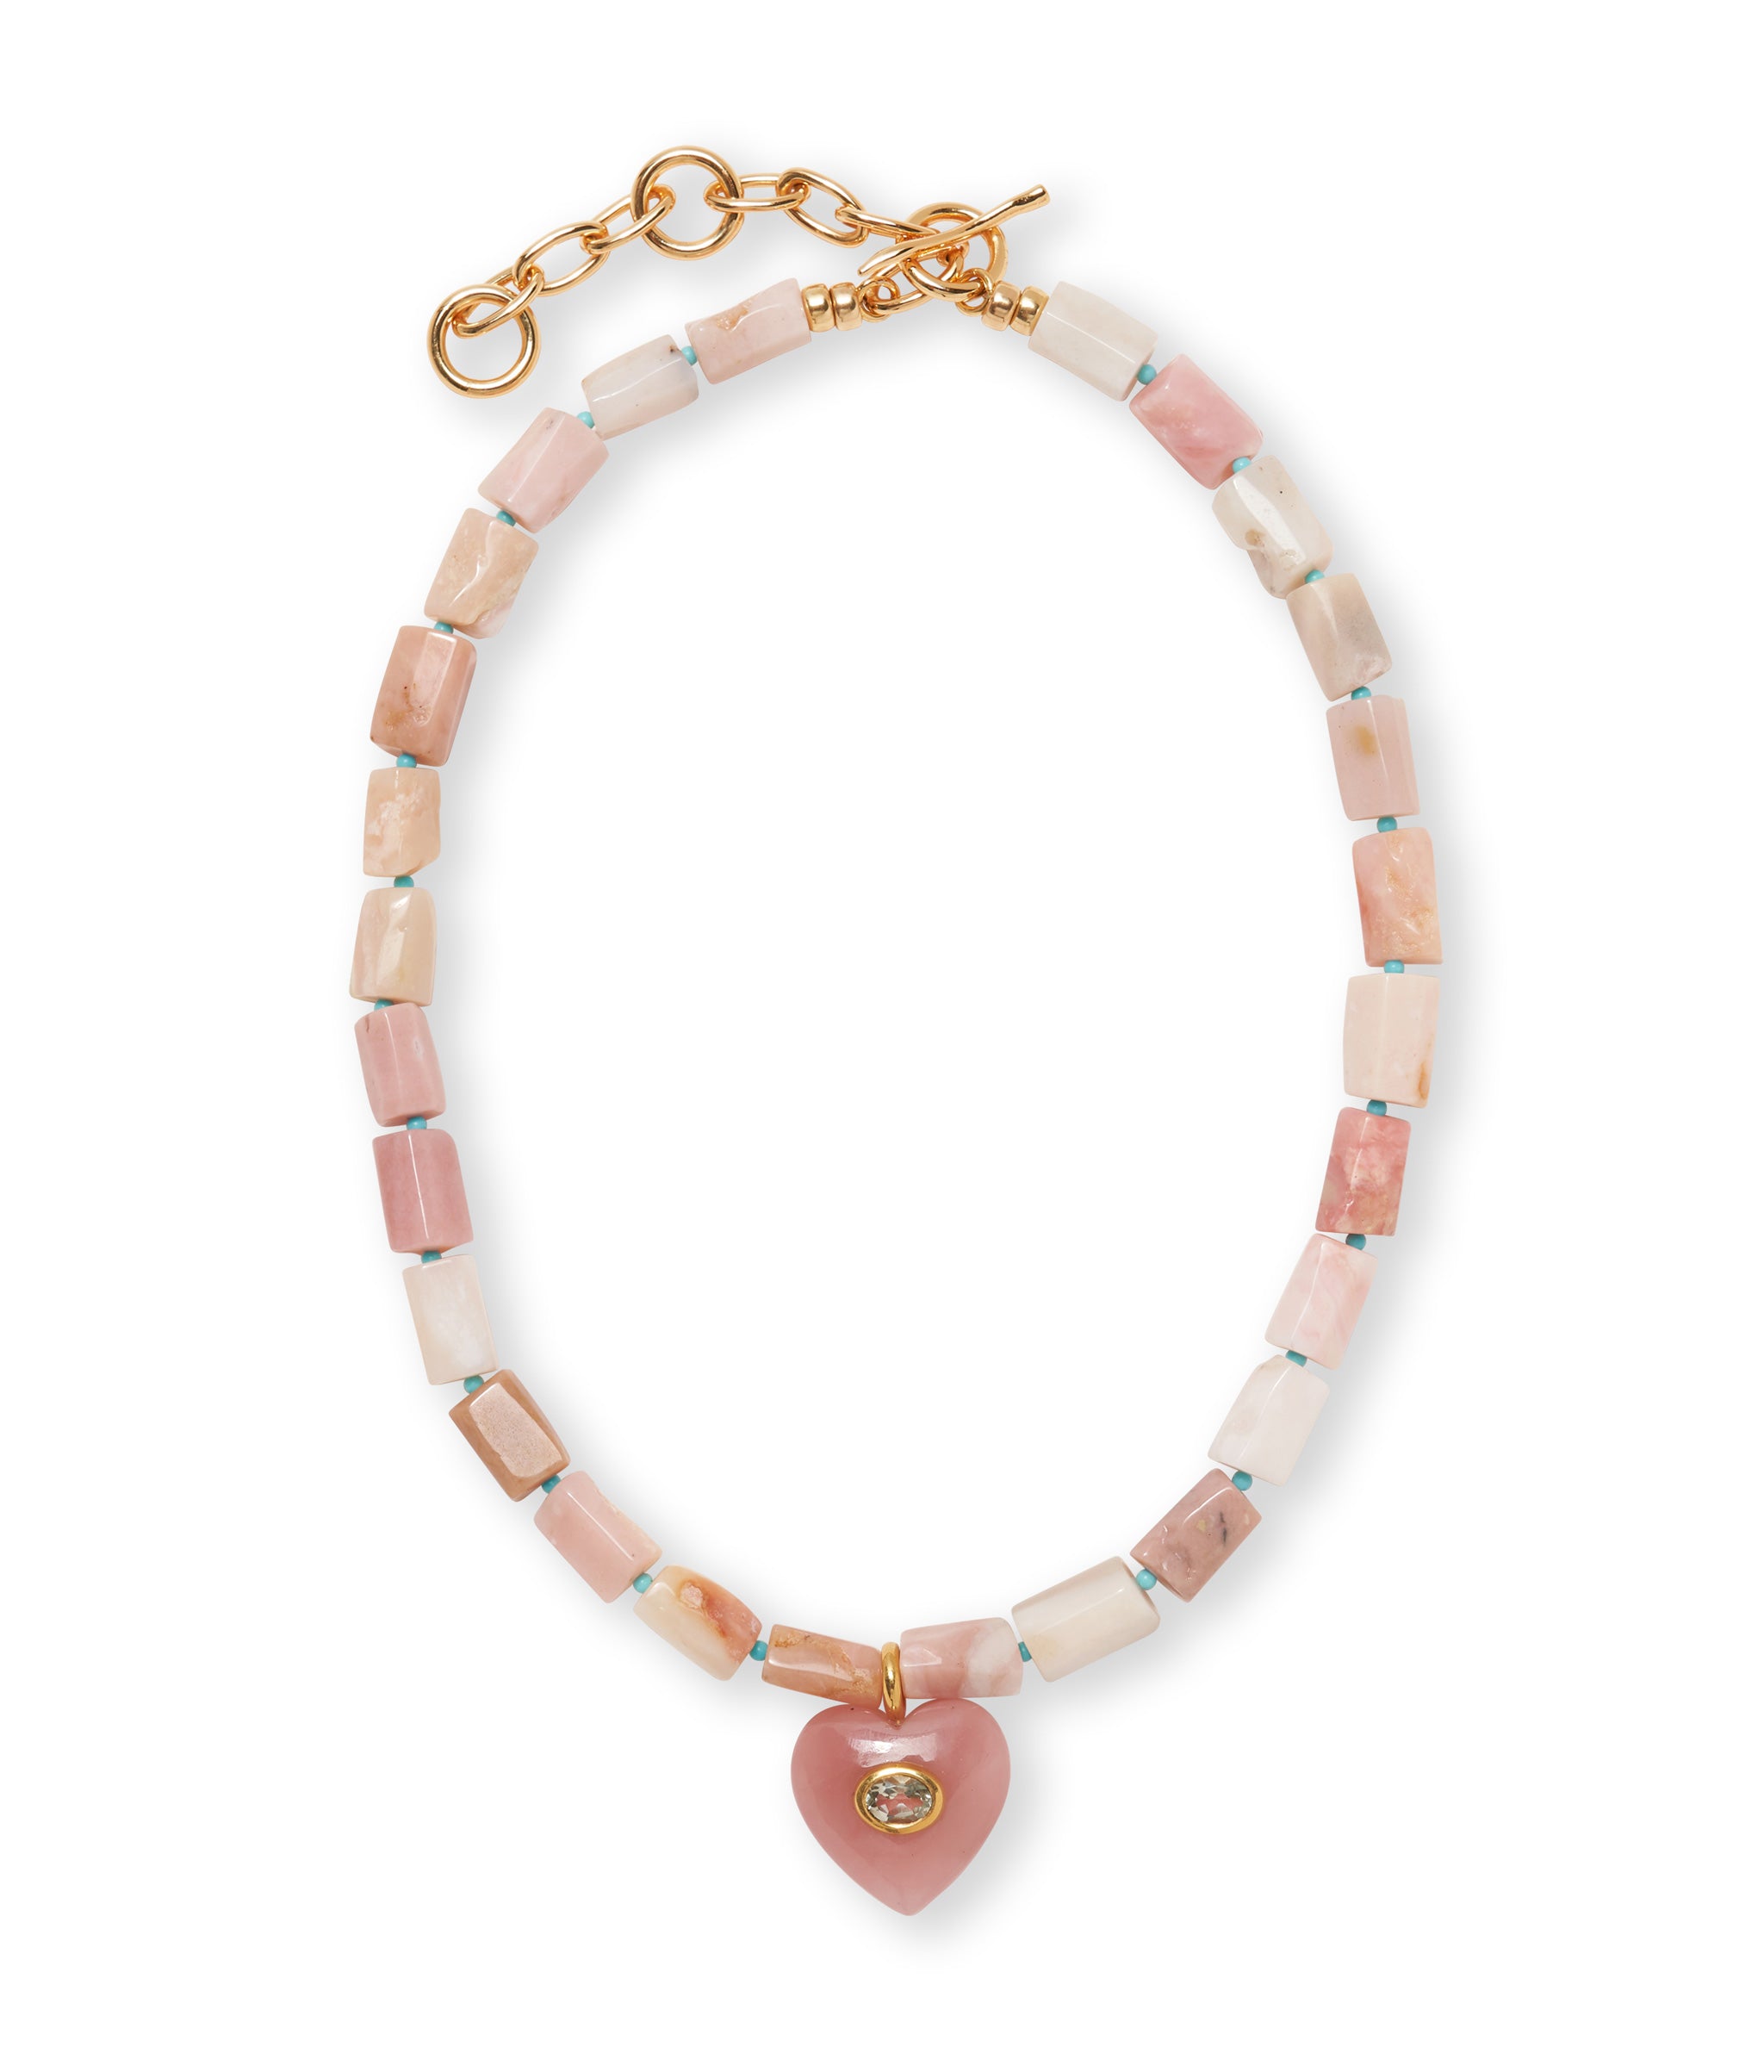 Infatuation Necklace in Guava